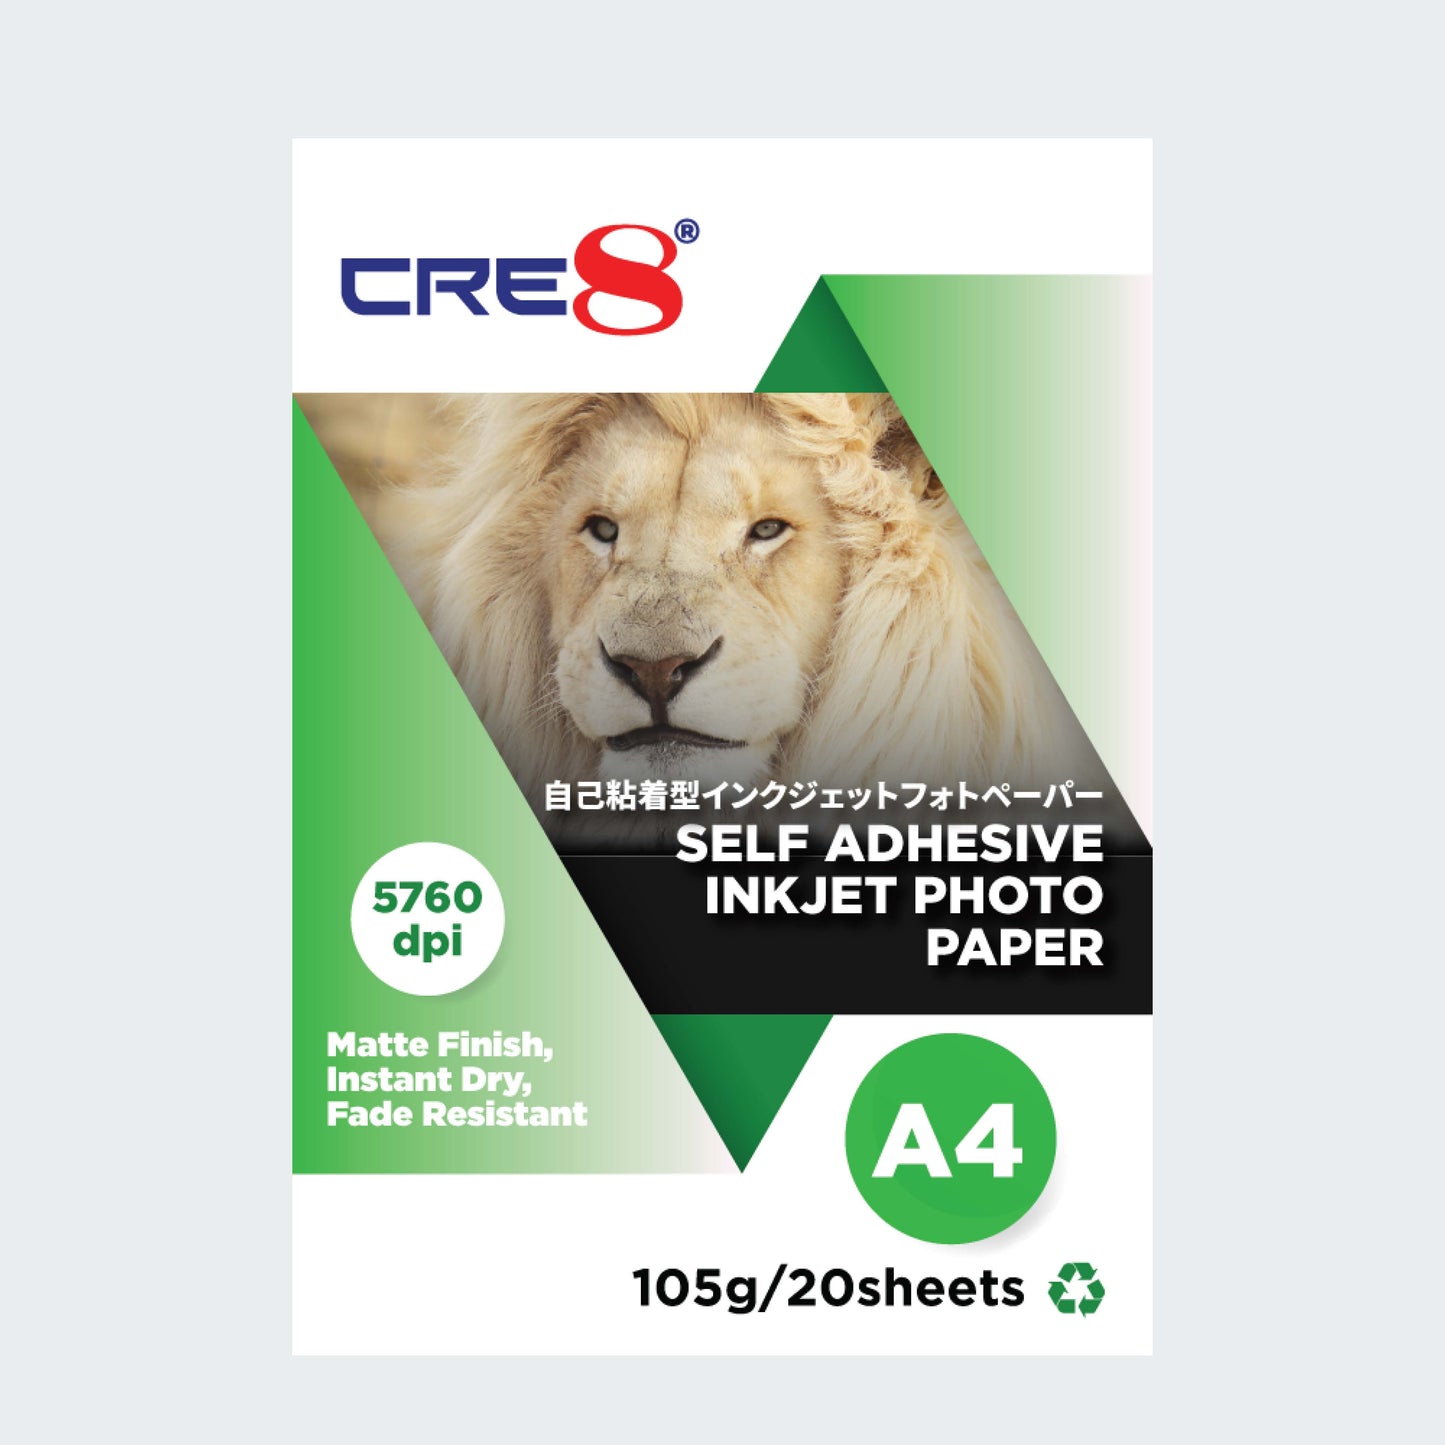 CRE8 | Self Adhesive Inkjet Photo Paper A4 105g/20 sheets